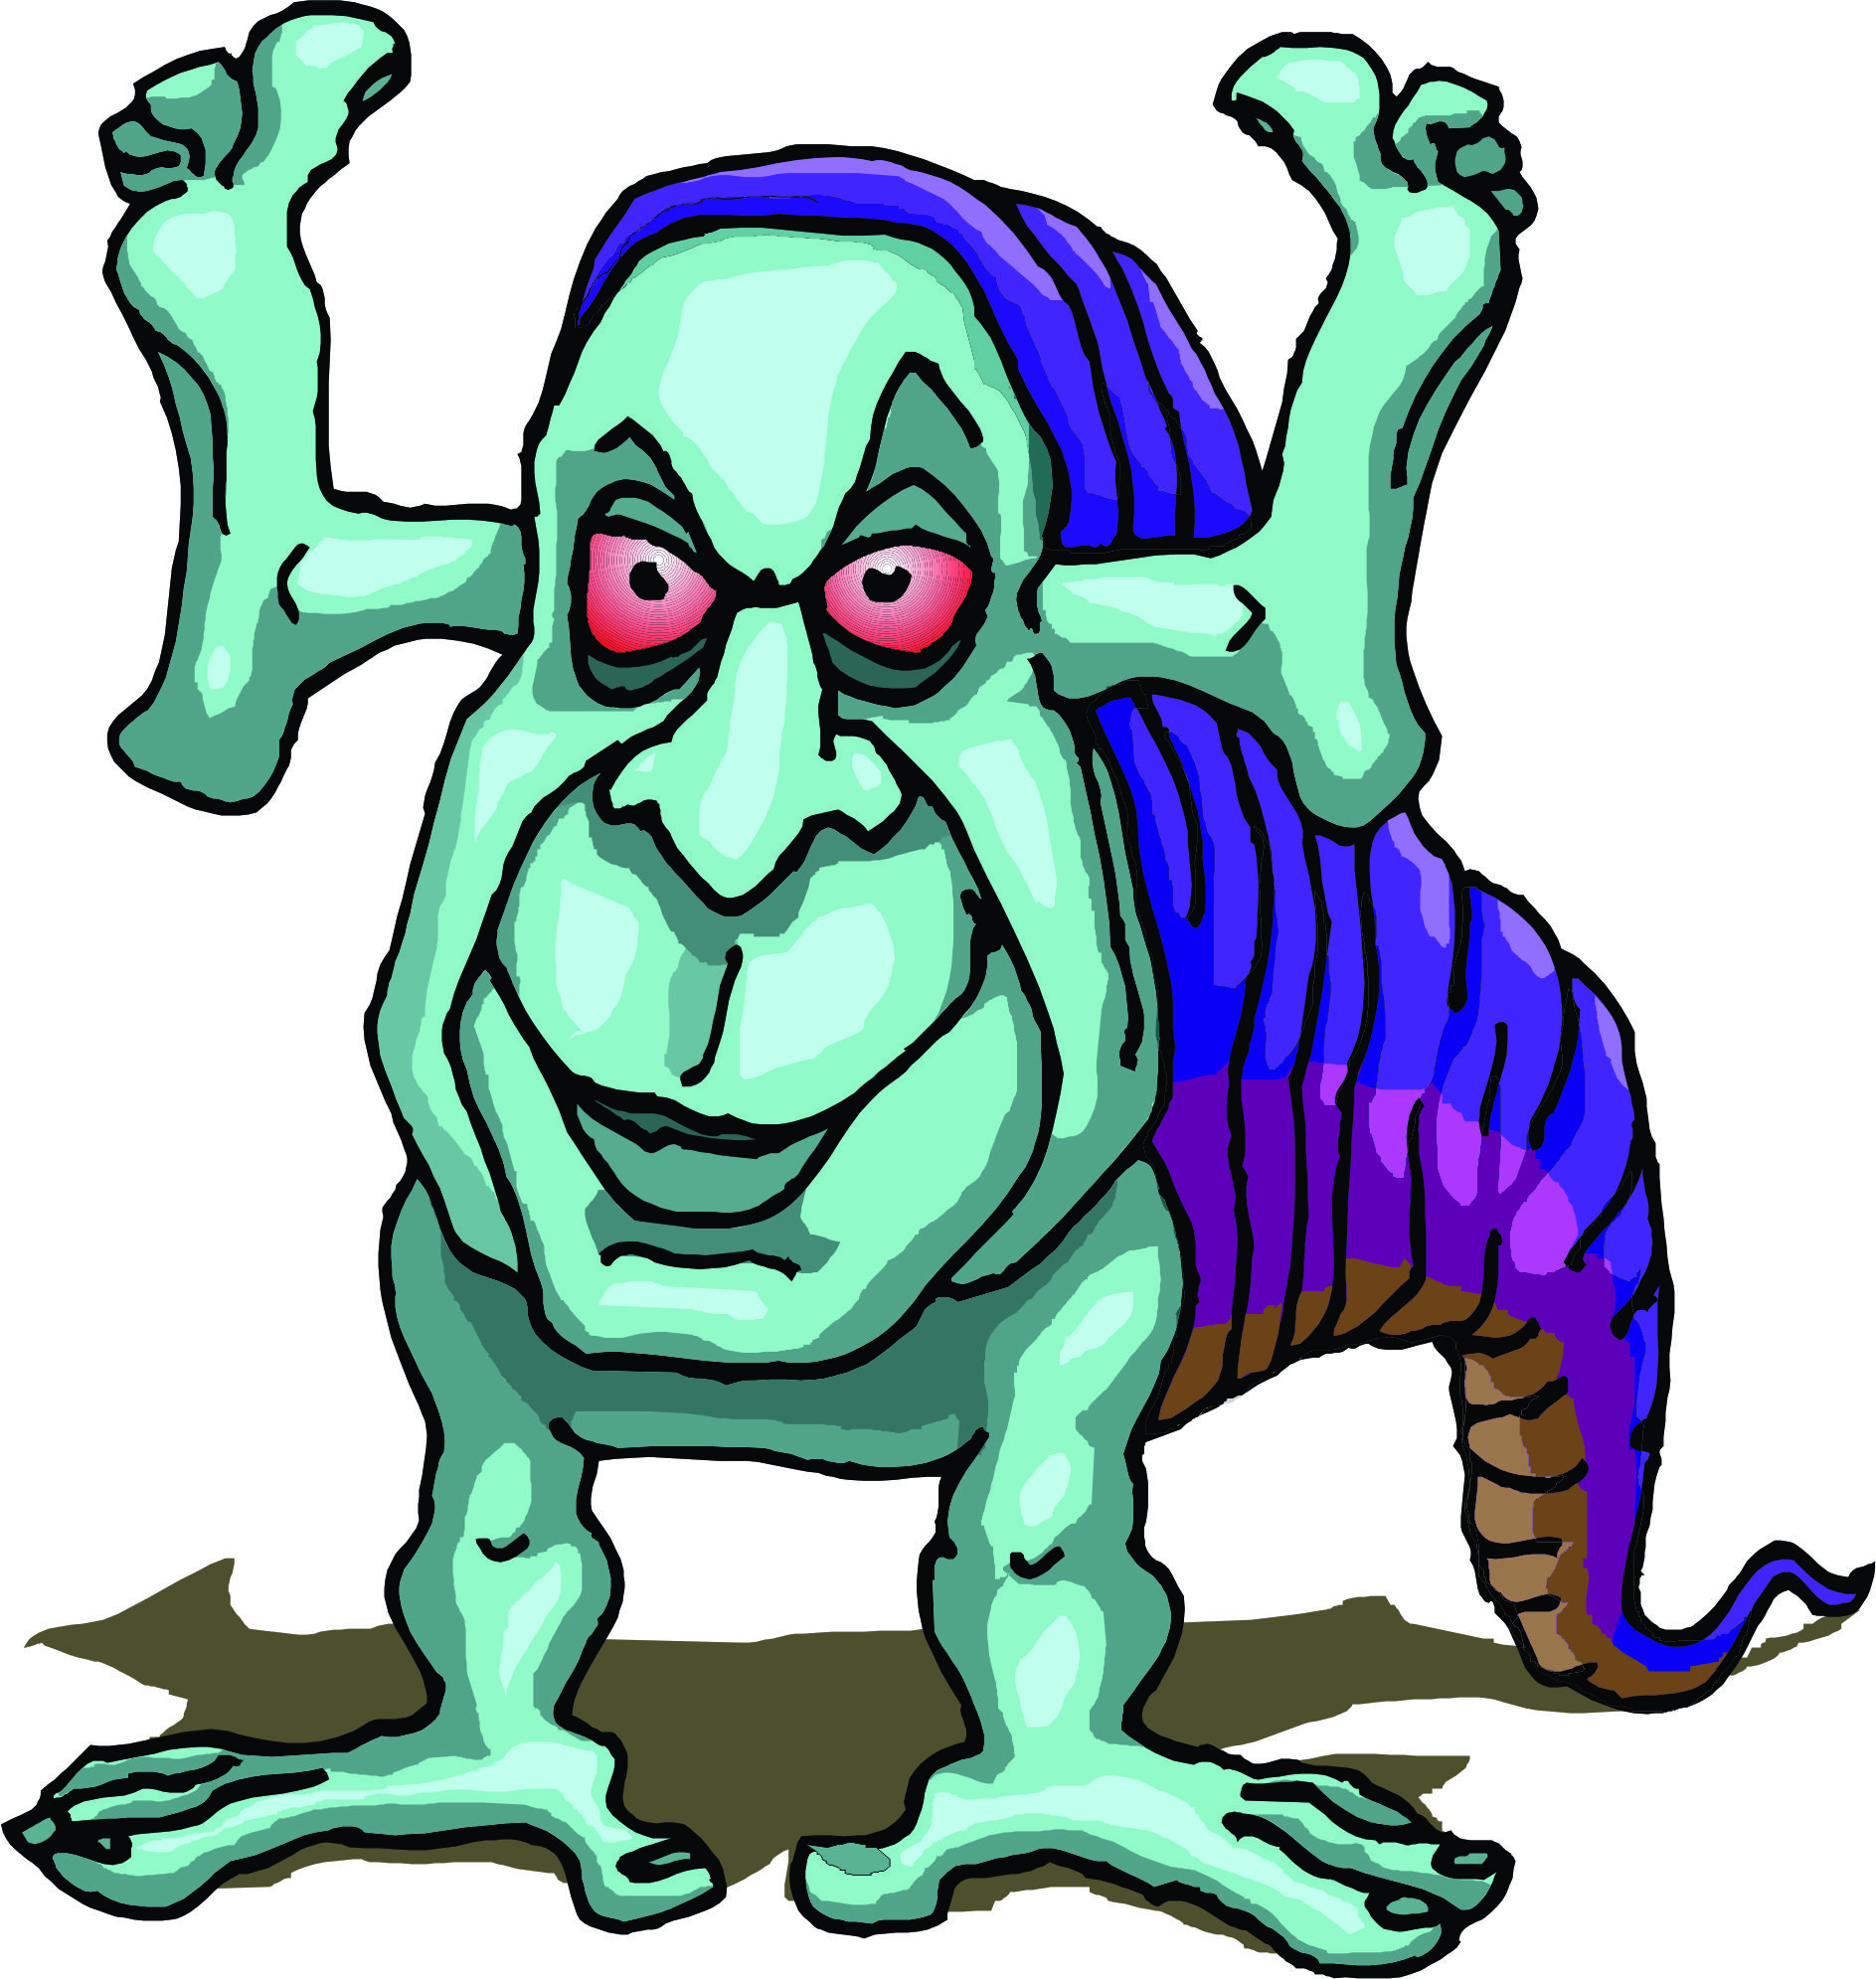 Scary Monsters That Come Out At Night - Clipart library - Clipart library